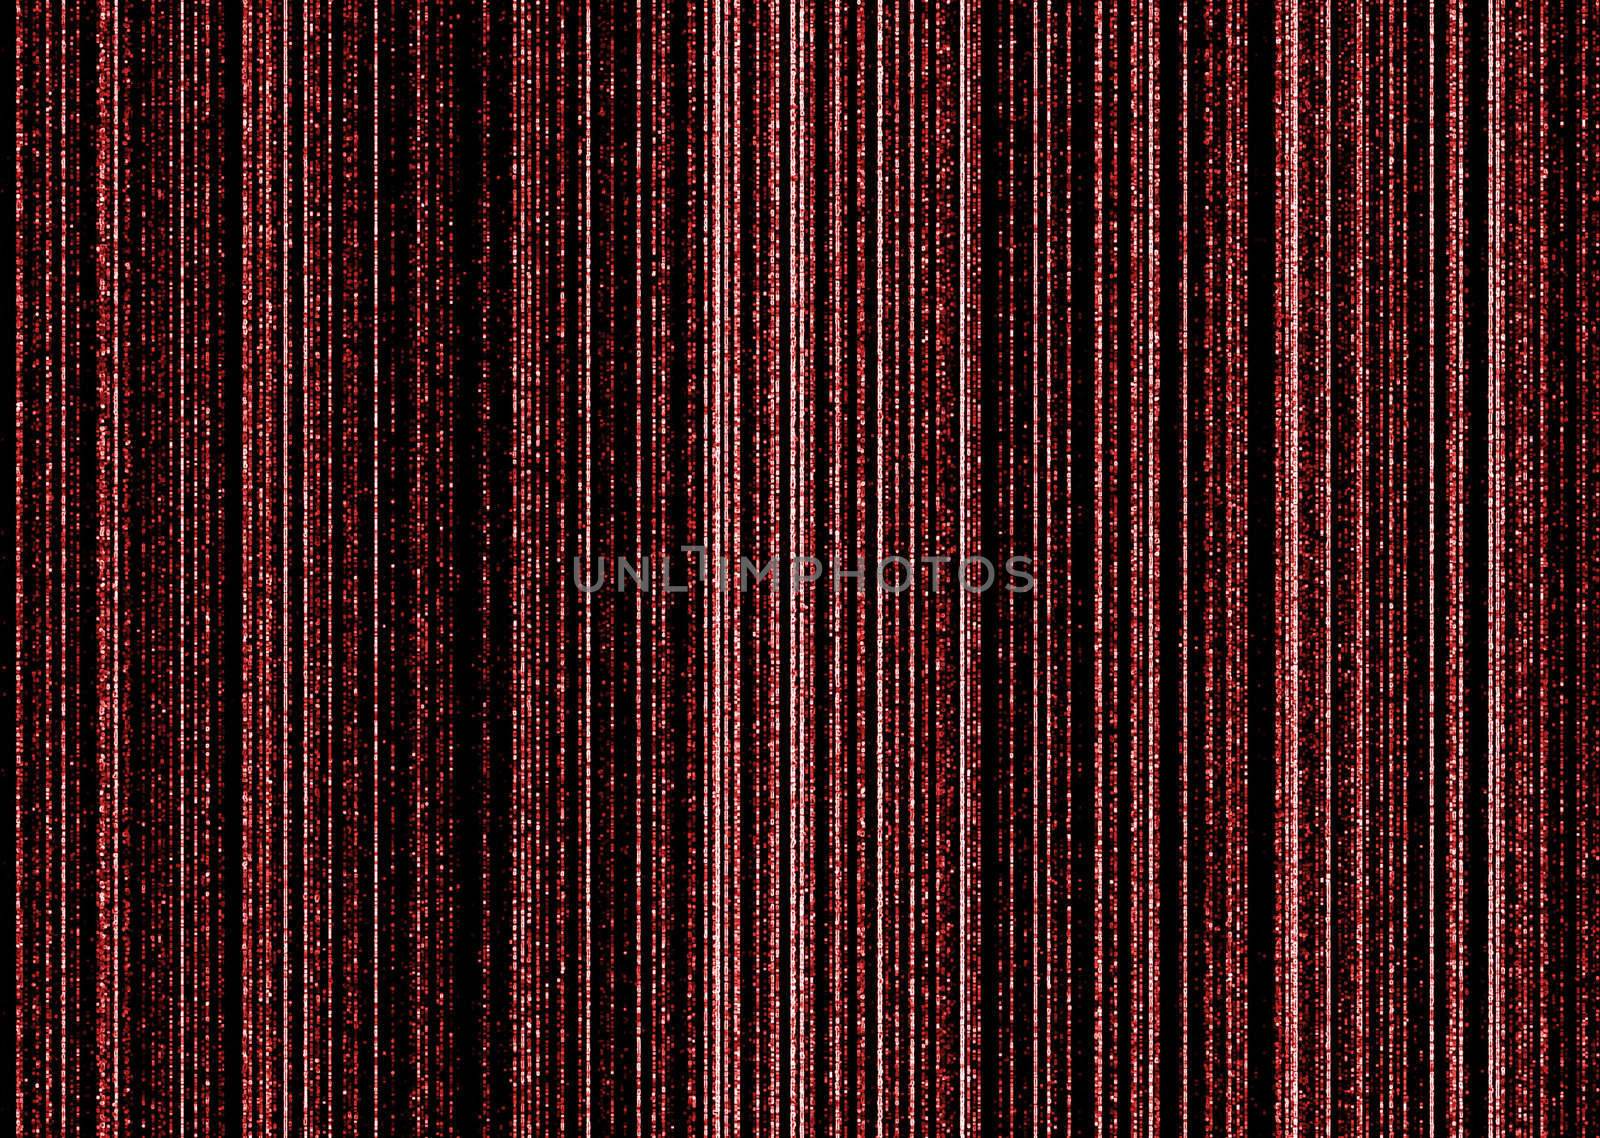 Illustrated matrix concept background image in black and red